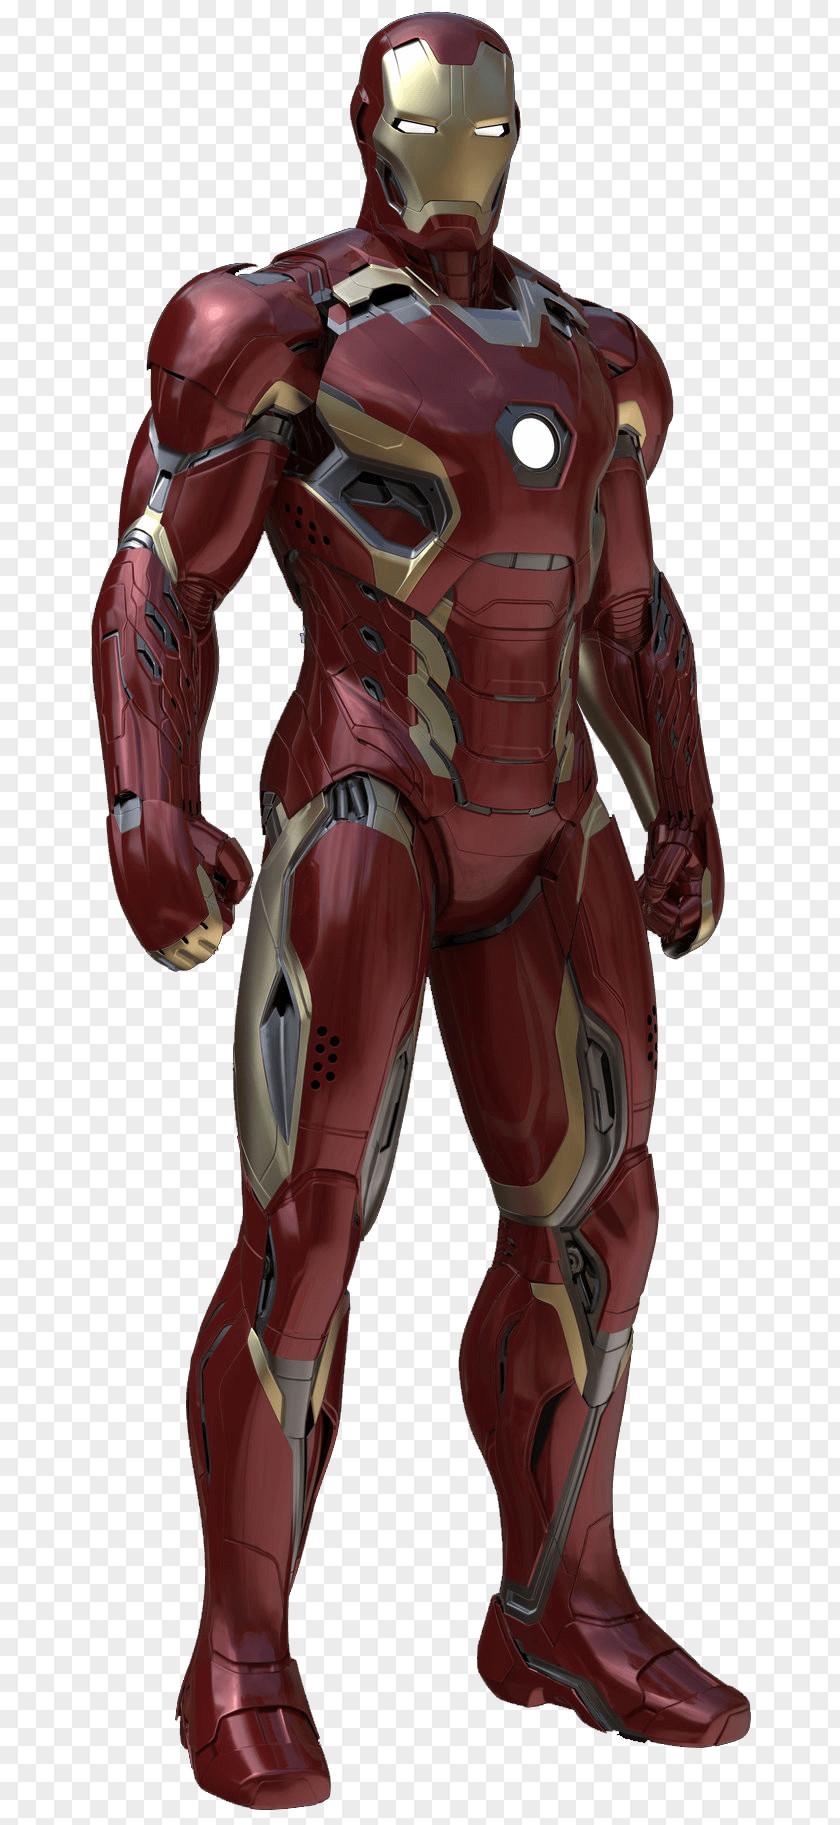 Iron Man Man's Armor Edwin Jarvis Marvel Cinematic Universe Film PNG